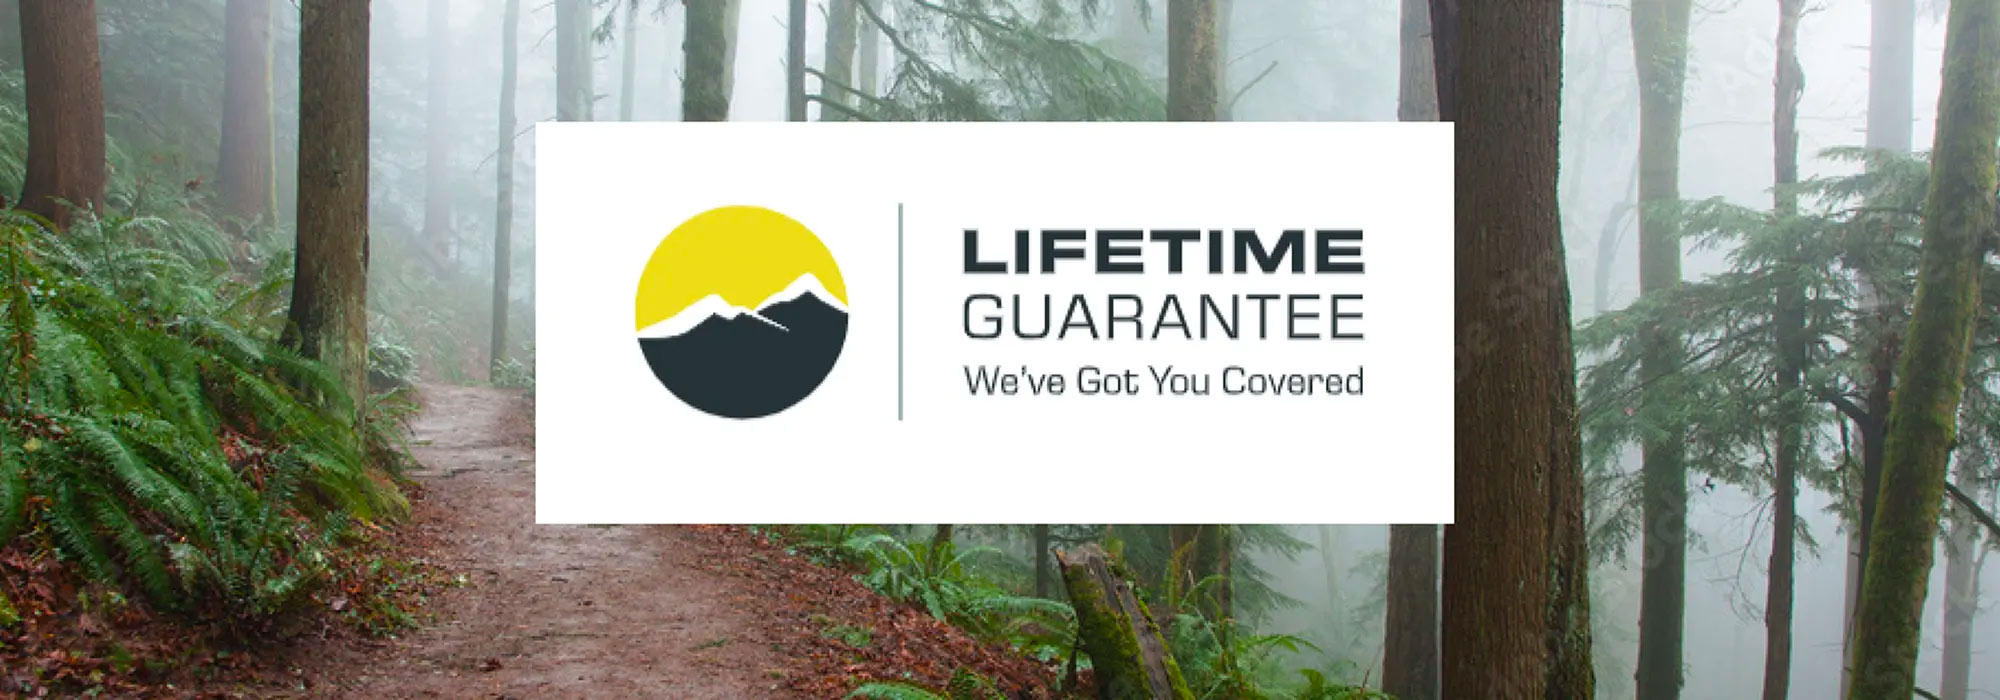 Lifetime Guarantee - We've Got You Covered